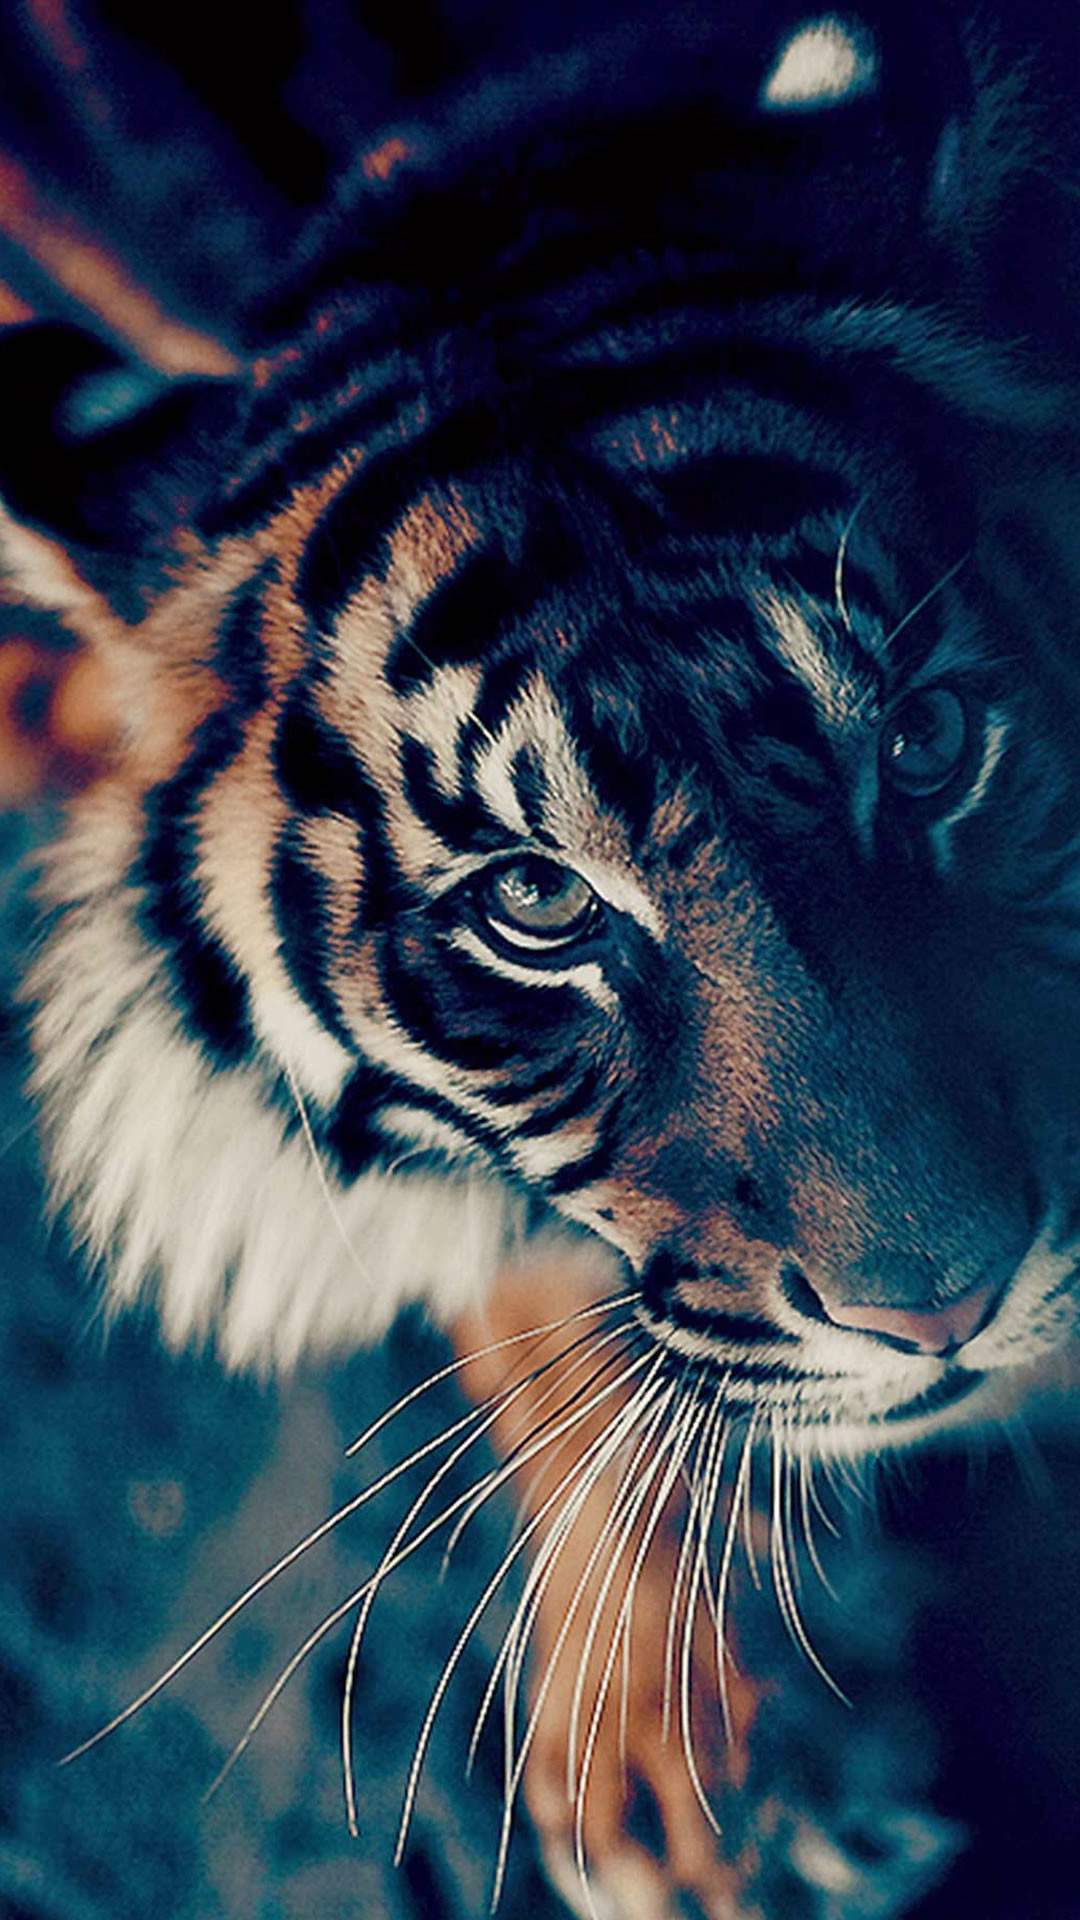 1080x1920 The 25+ best Tiger wallpaper ideas on Pinterest | Tiger pictures, Tigers in  the wild and Tigers